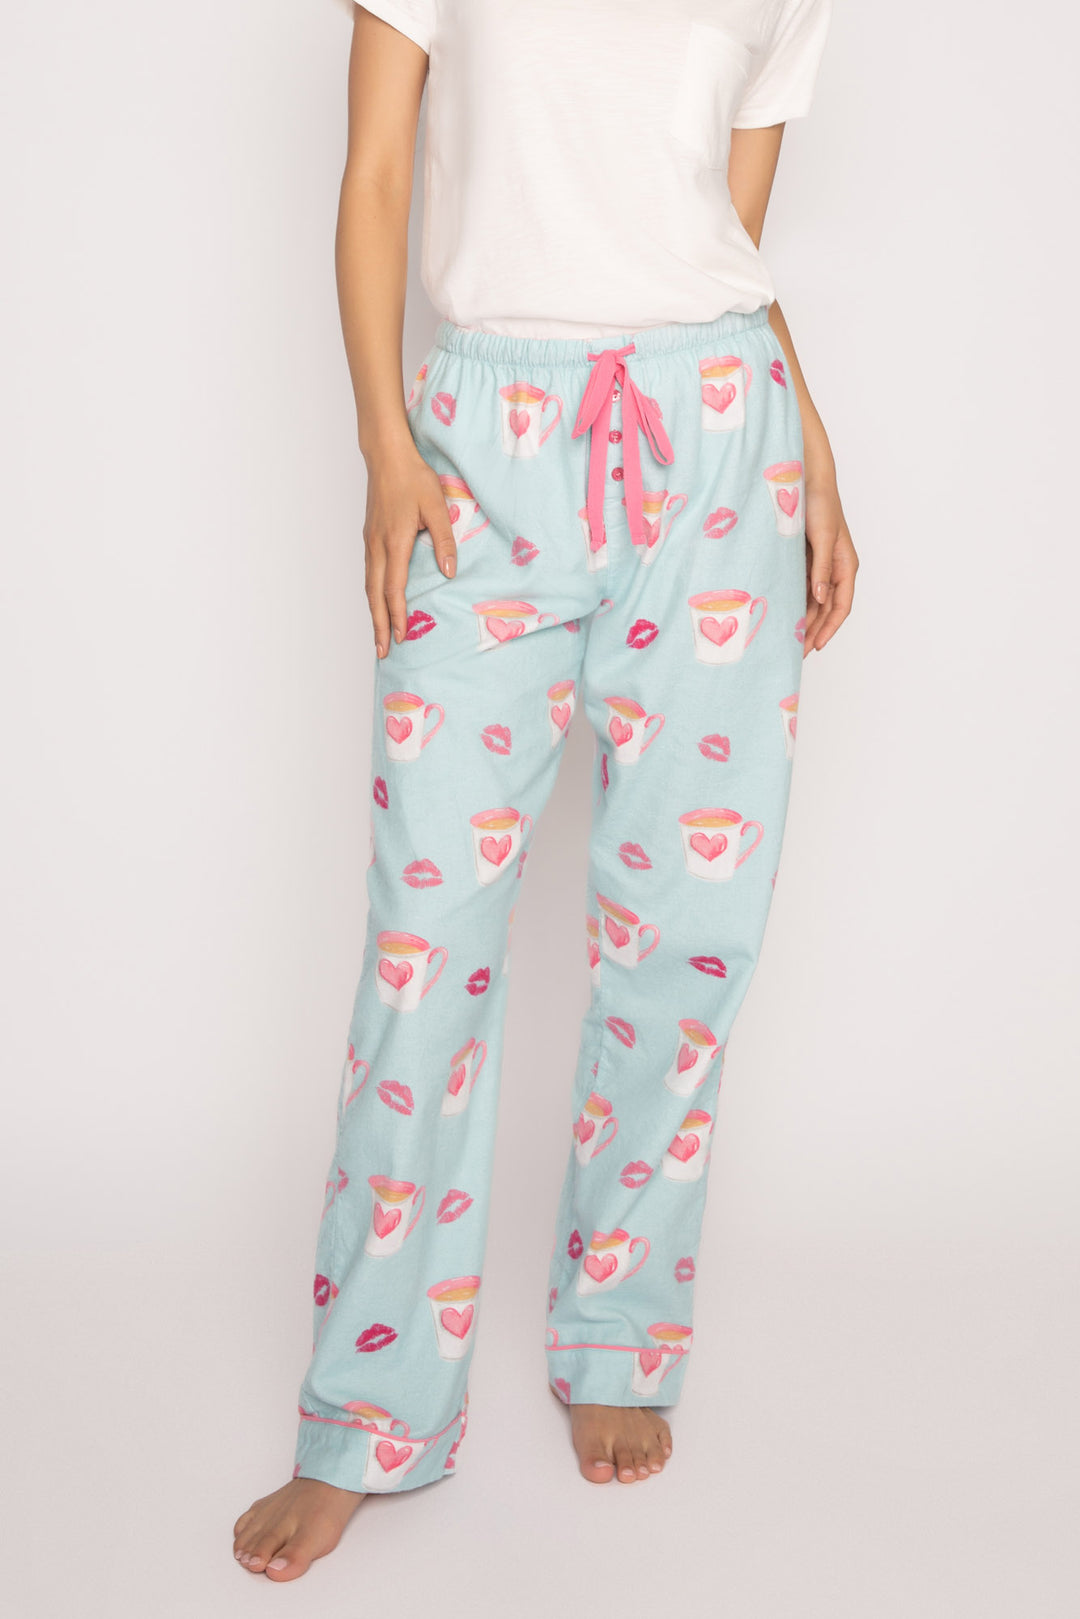 Aqua cotton flannel pajama pant with coffee cup & love print. Relaxed fit & tie waist. (7231868797028)